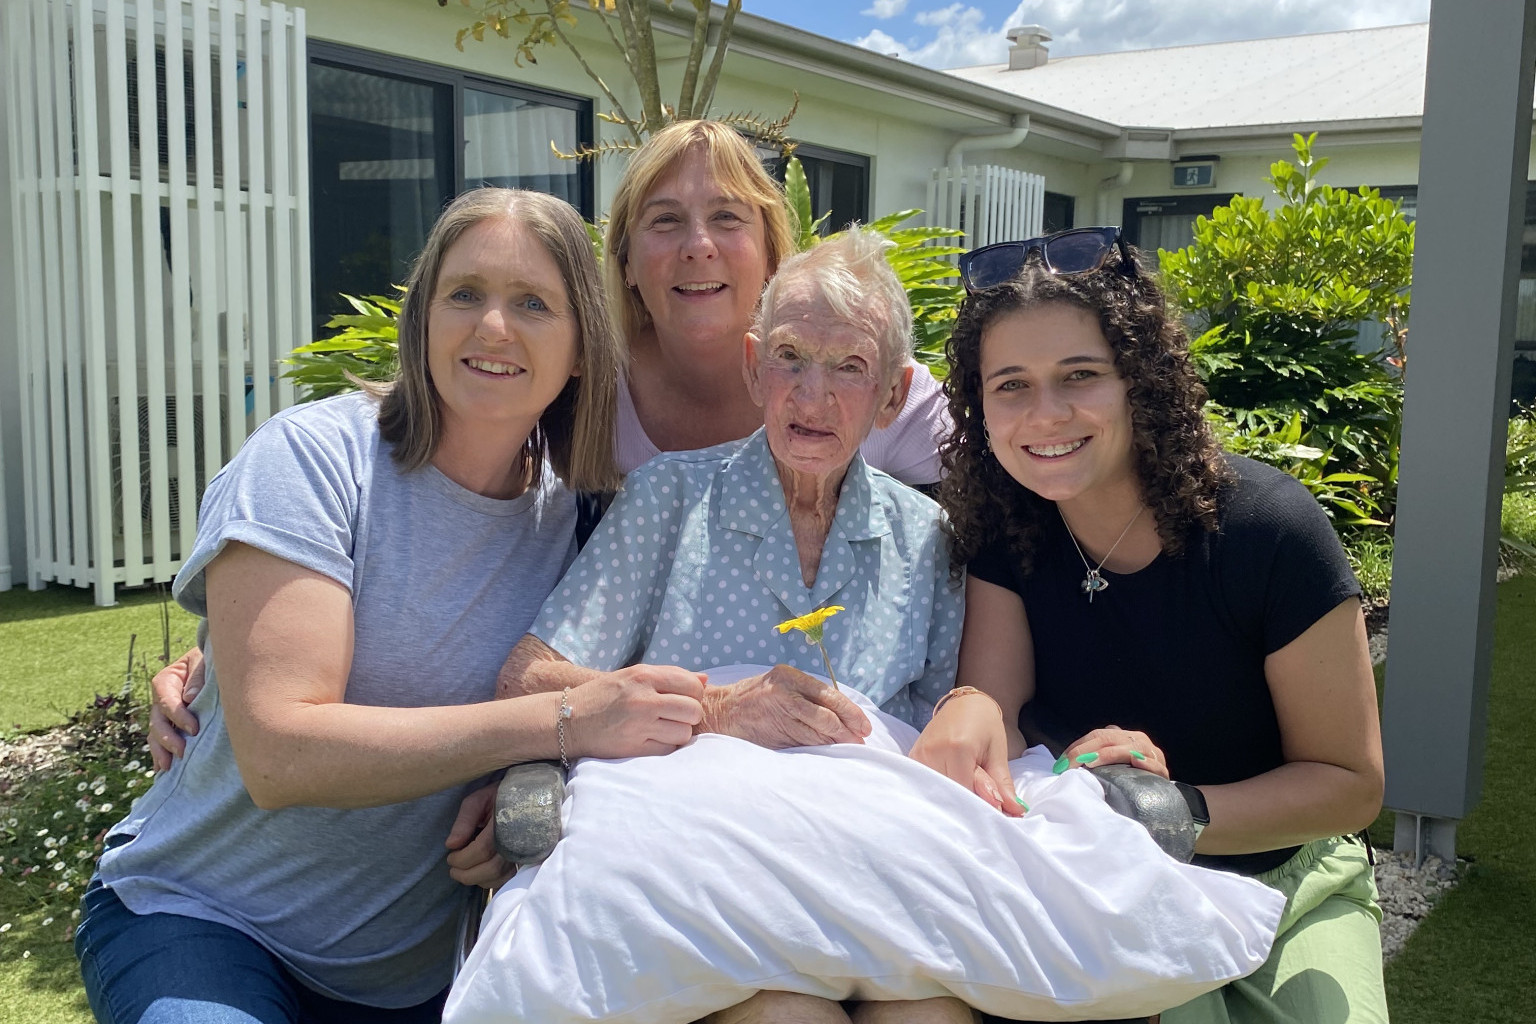 Wamuran-based Jessie Morgan (second from right) marked her 100th birthday last week. She is pictured with Amanda (granddaughter), Cecilia (daughter) and Tamika (great granddaughter).